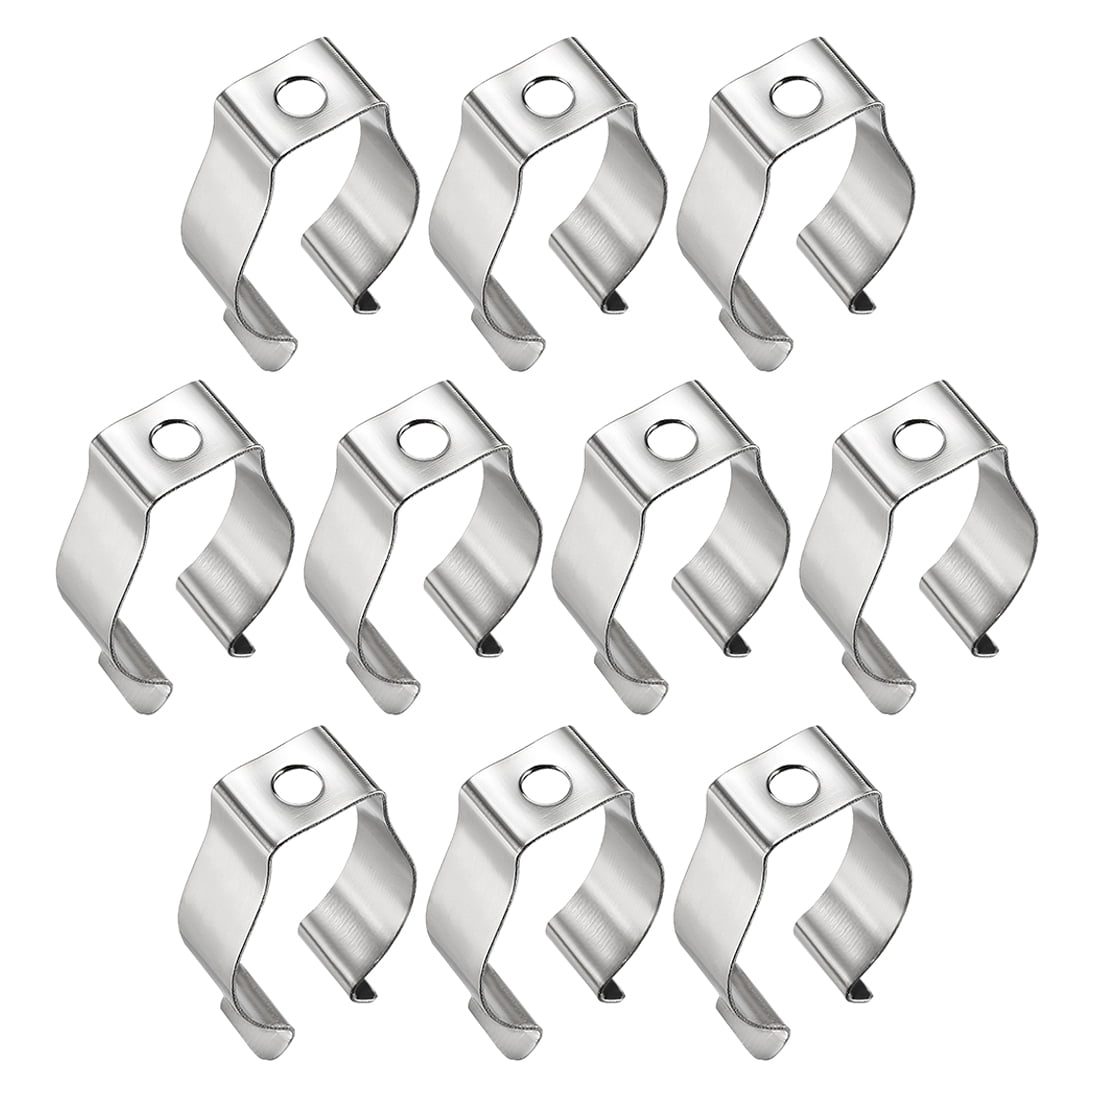 1" Terry Clips 100x T8 Fluorescent Tube Holders Clip on Tools Other Uses 25mm 